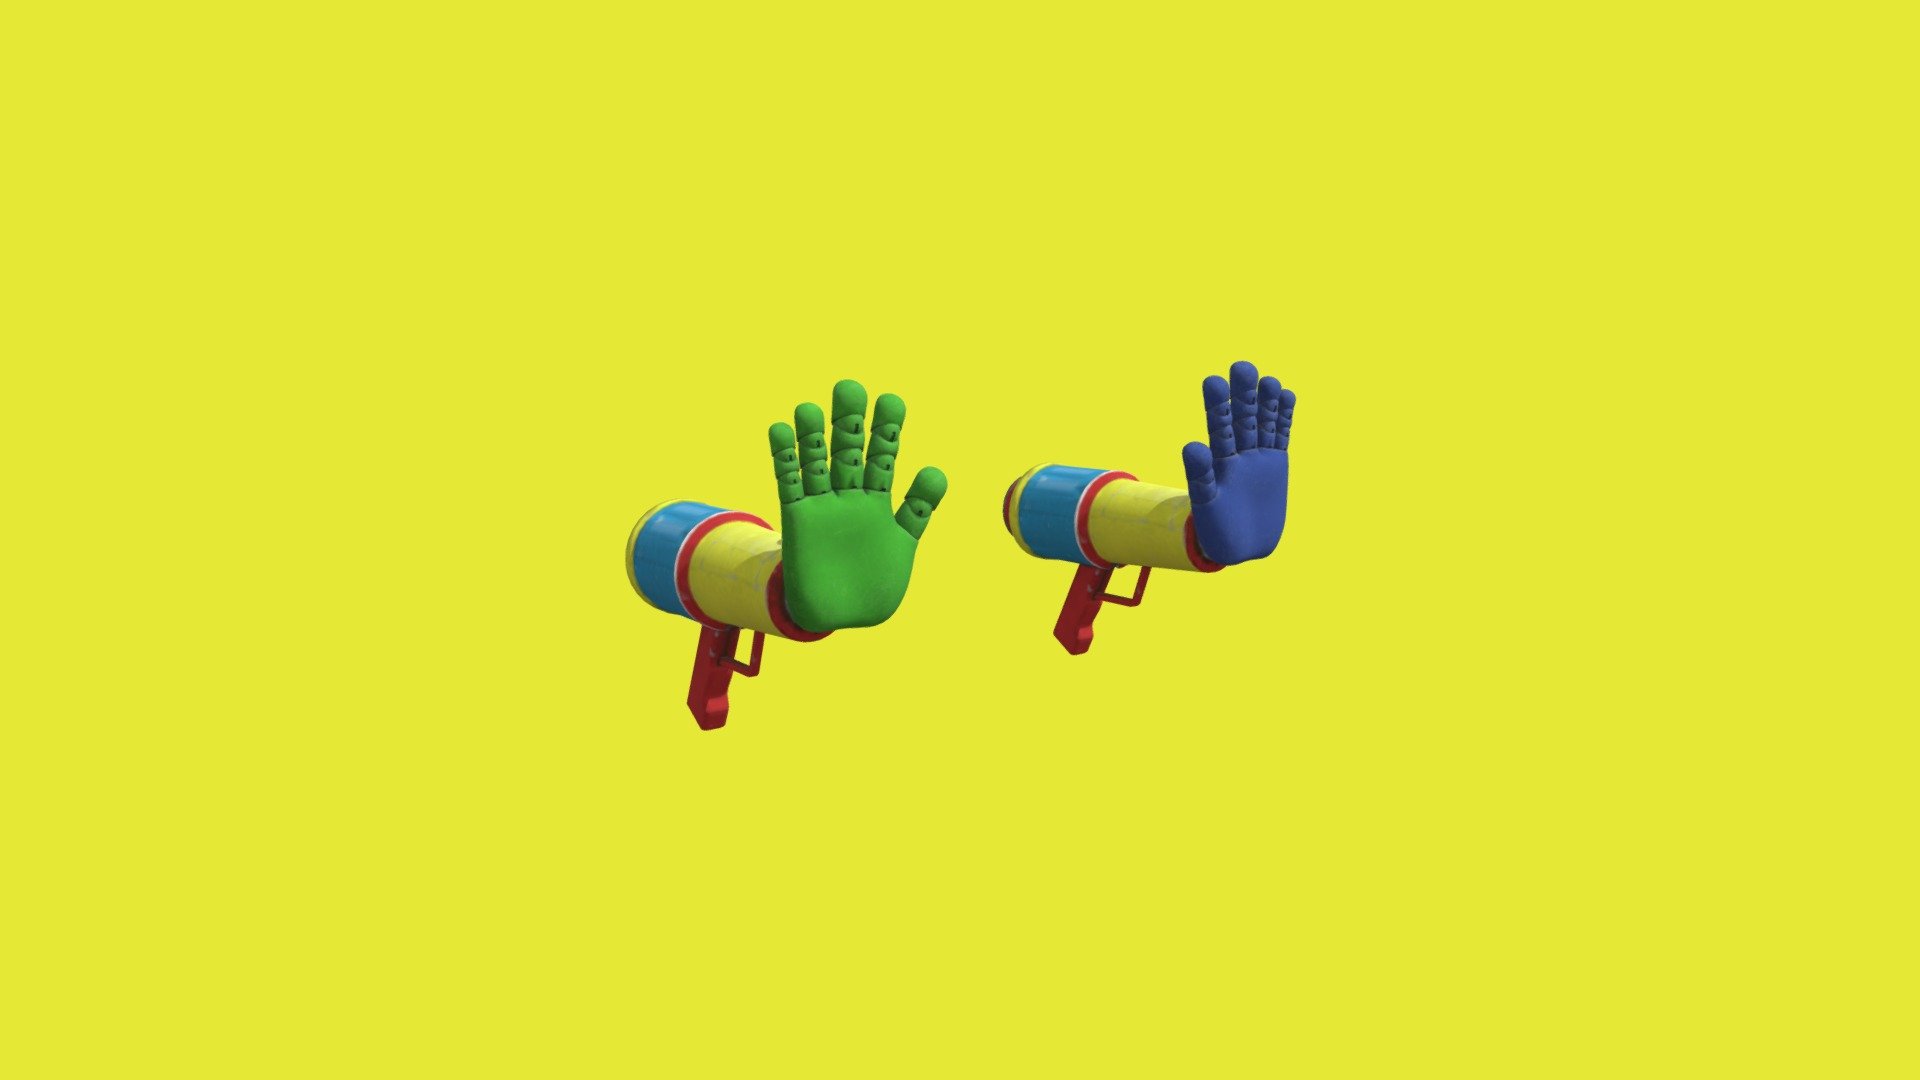 GrabPack Offical 3D models by MOB GAMES (used in poppy playtime) this GrabPack has 2 hands, a blue hand and a green hand - Chapter 2 GrabPack With 2 Hand - Download Free 3D model by Mathchop (@Matchop) 3d model